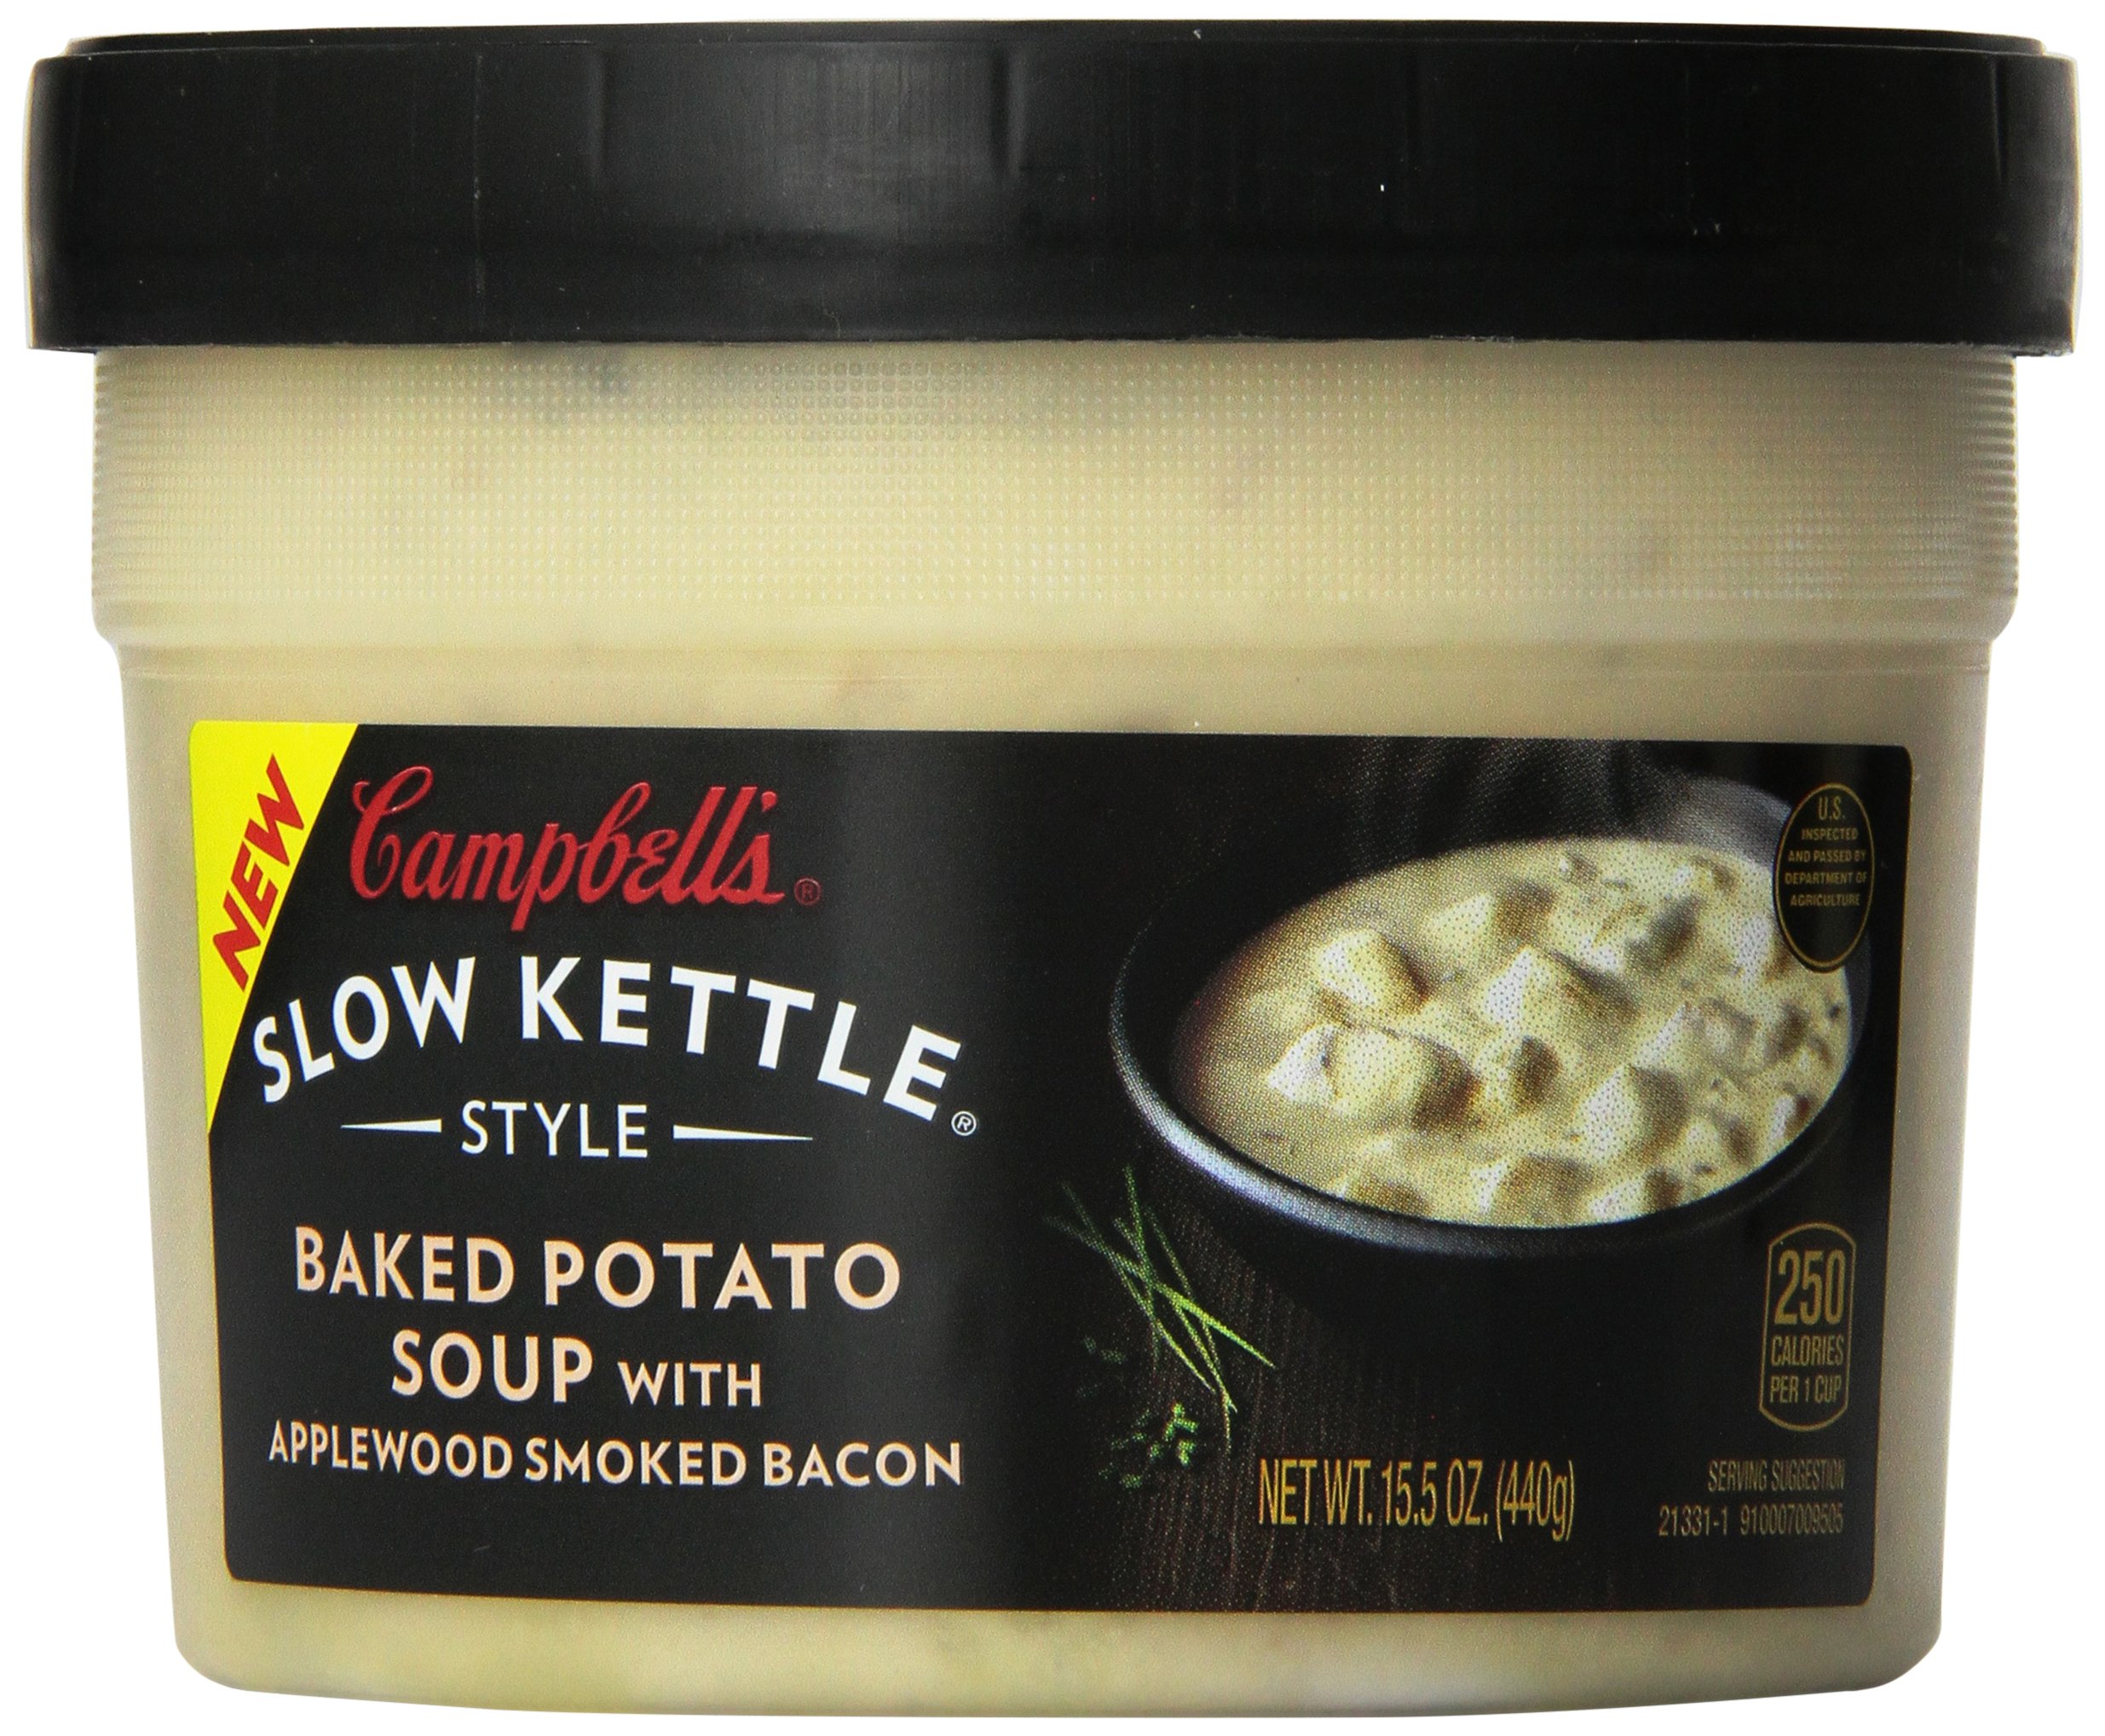 Campbell's, Slow Kettle Style, Soups, Stews, Chowders & Bisques, 15.5oz Bowl (Pack of 4) (Pick Flavors) (Baked Potato with Bacon)